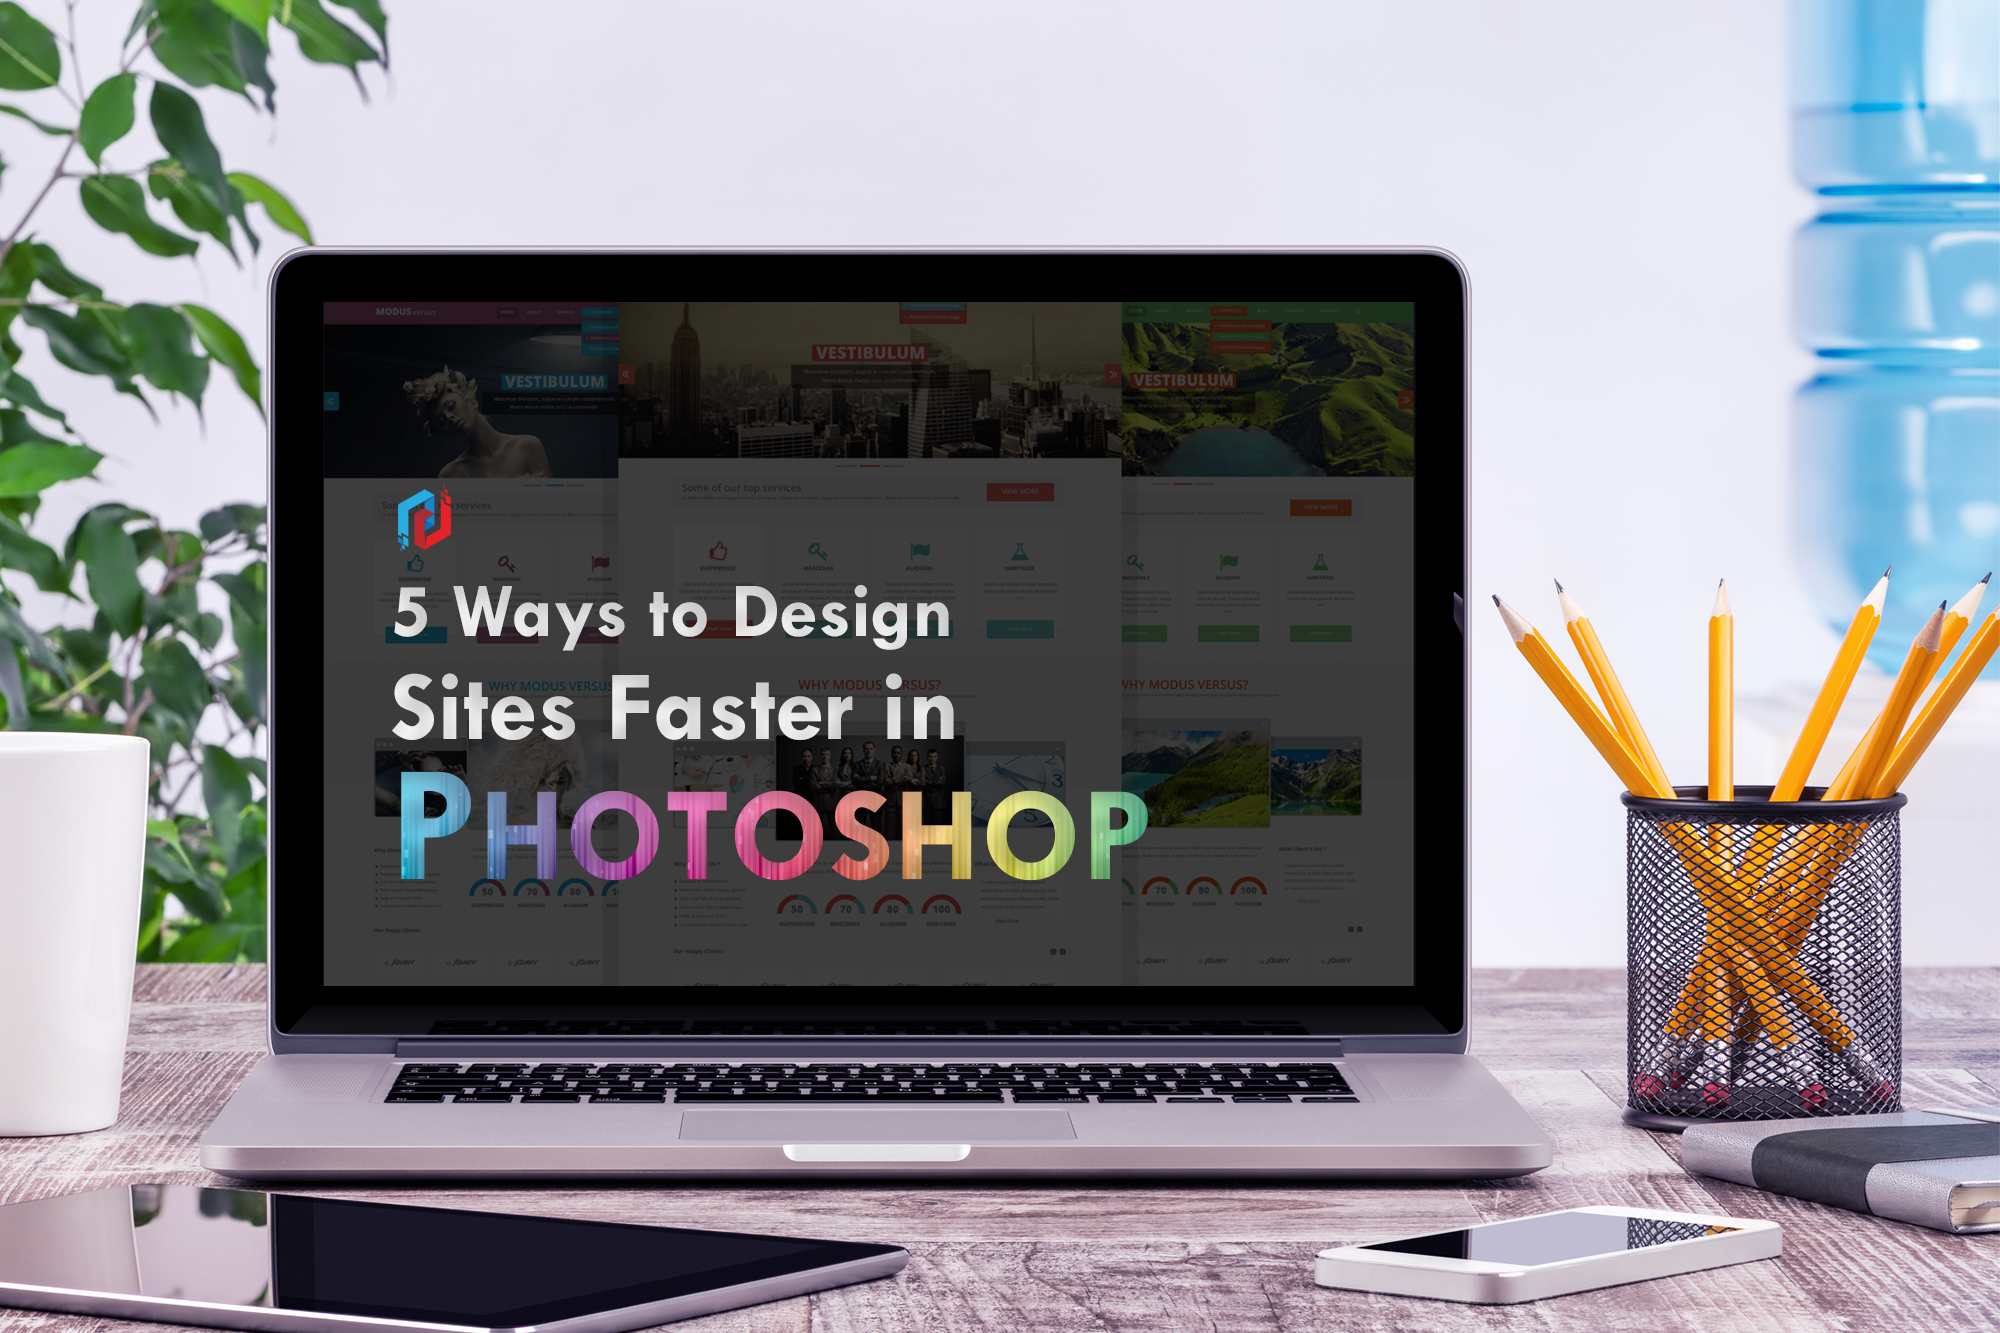 5 Ways to Design Sites Faster in Photoshop